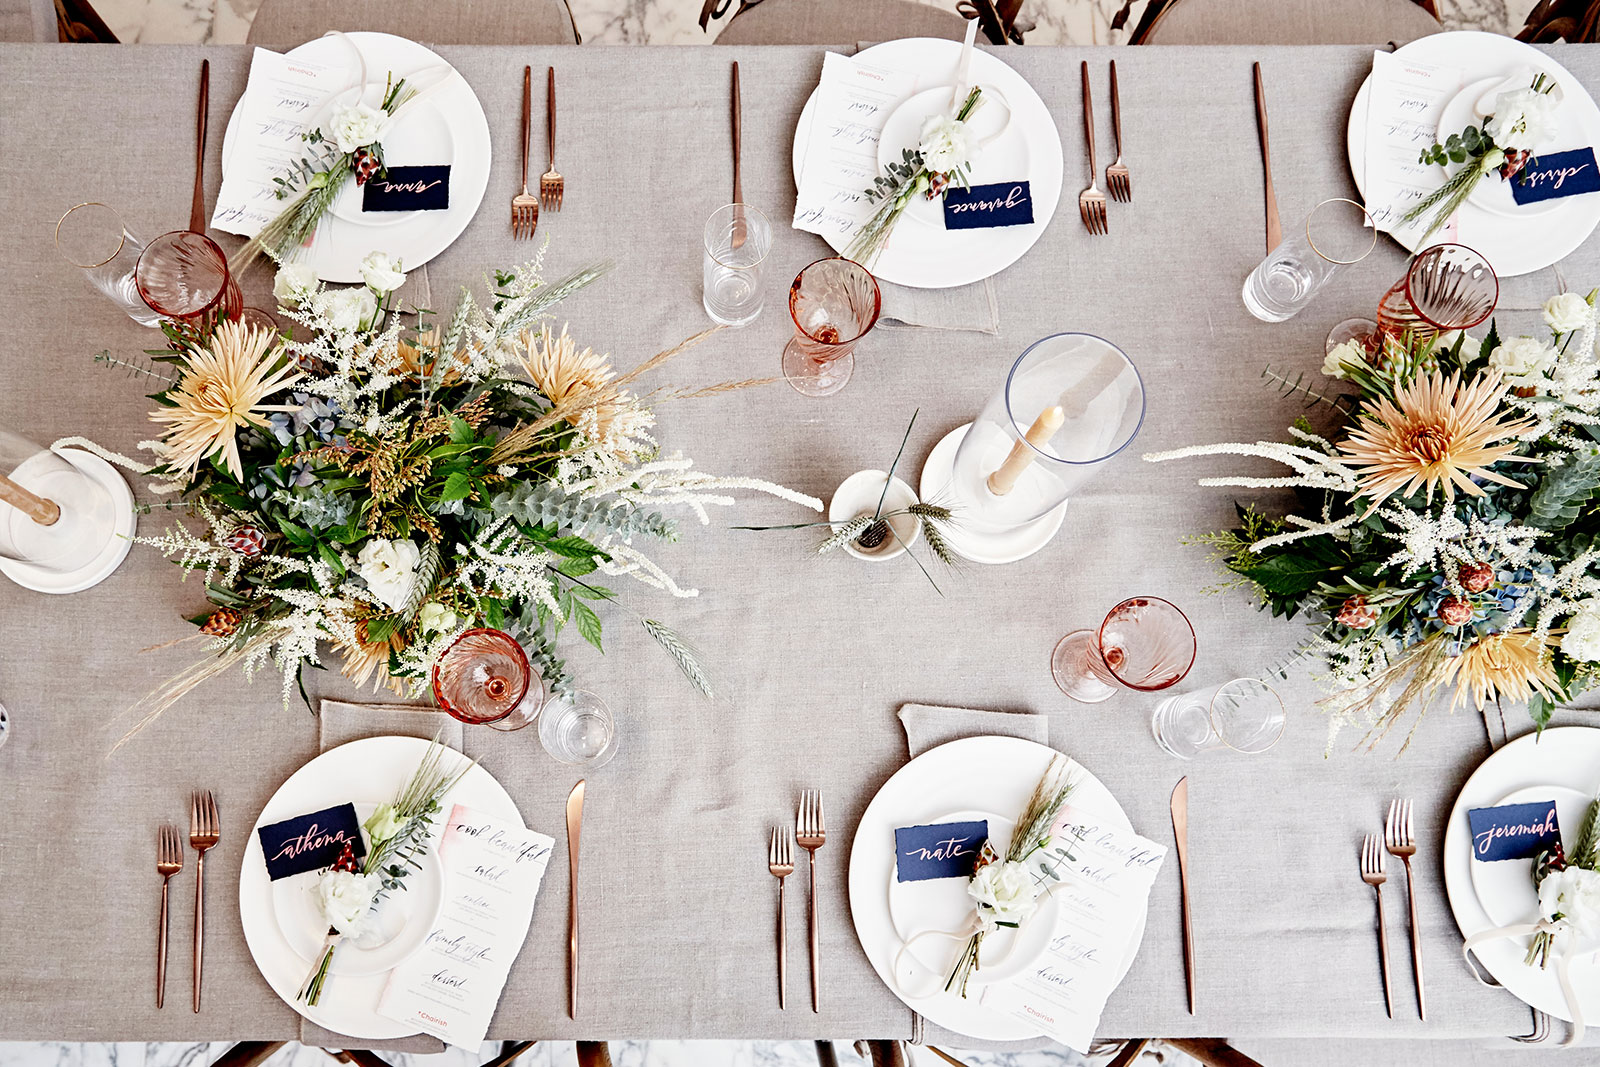 10 ways to decorate your table for Thanksgiving